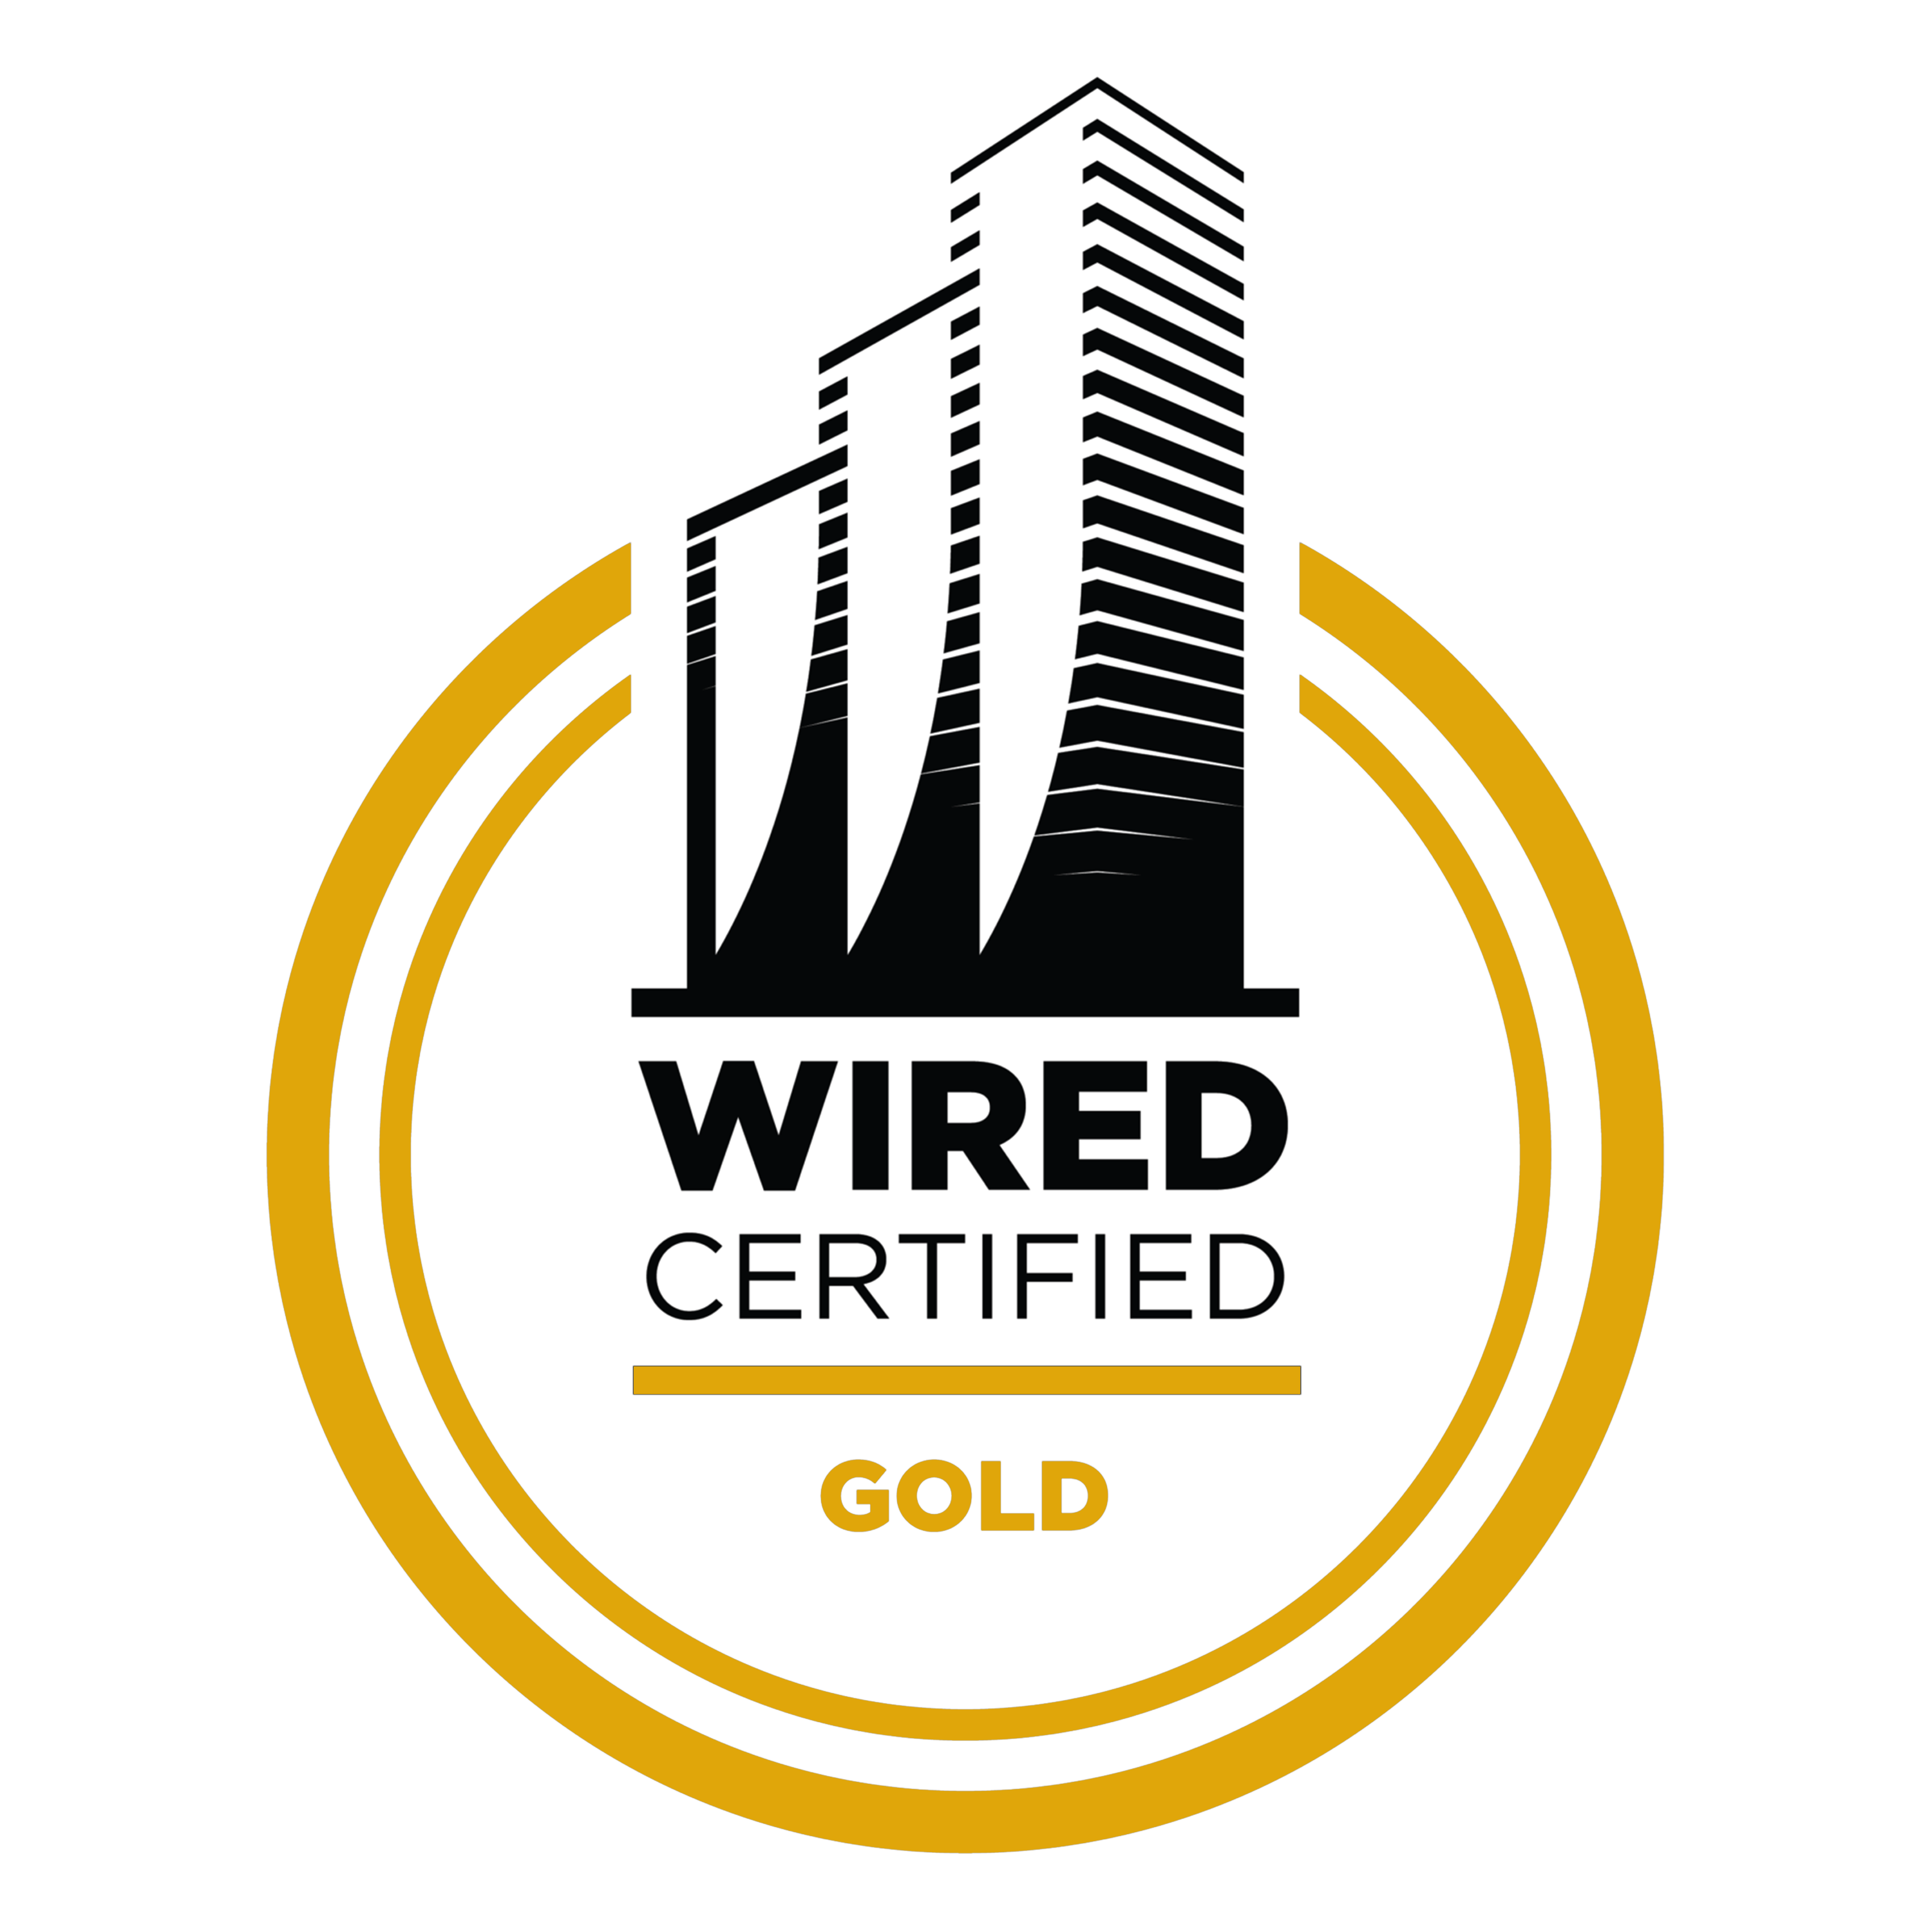 Wired Certified Gold Image